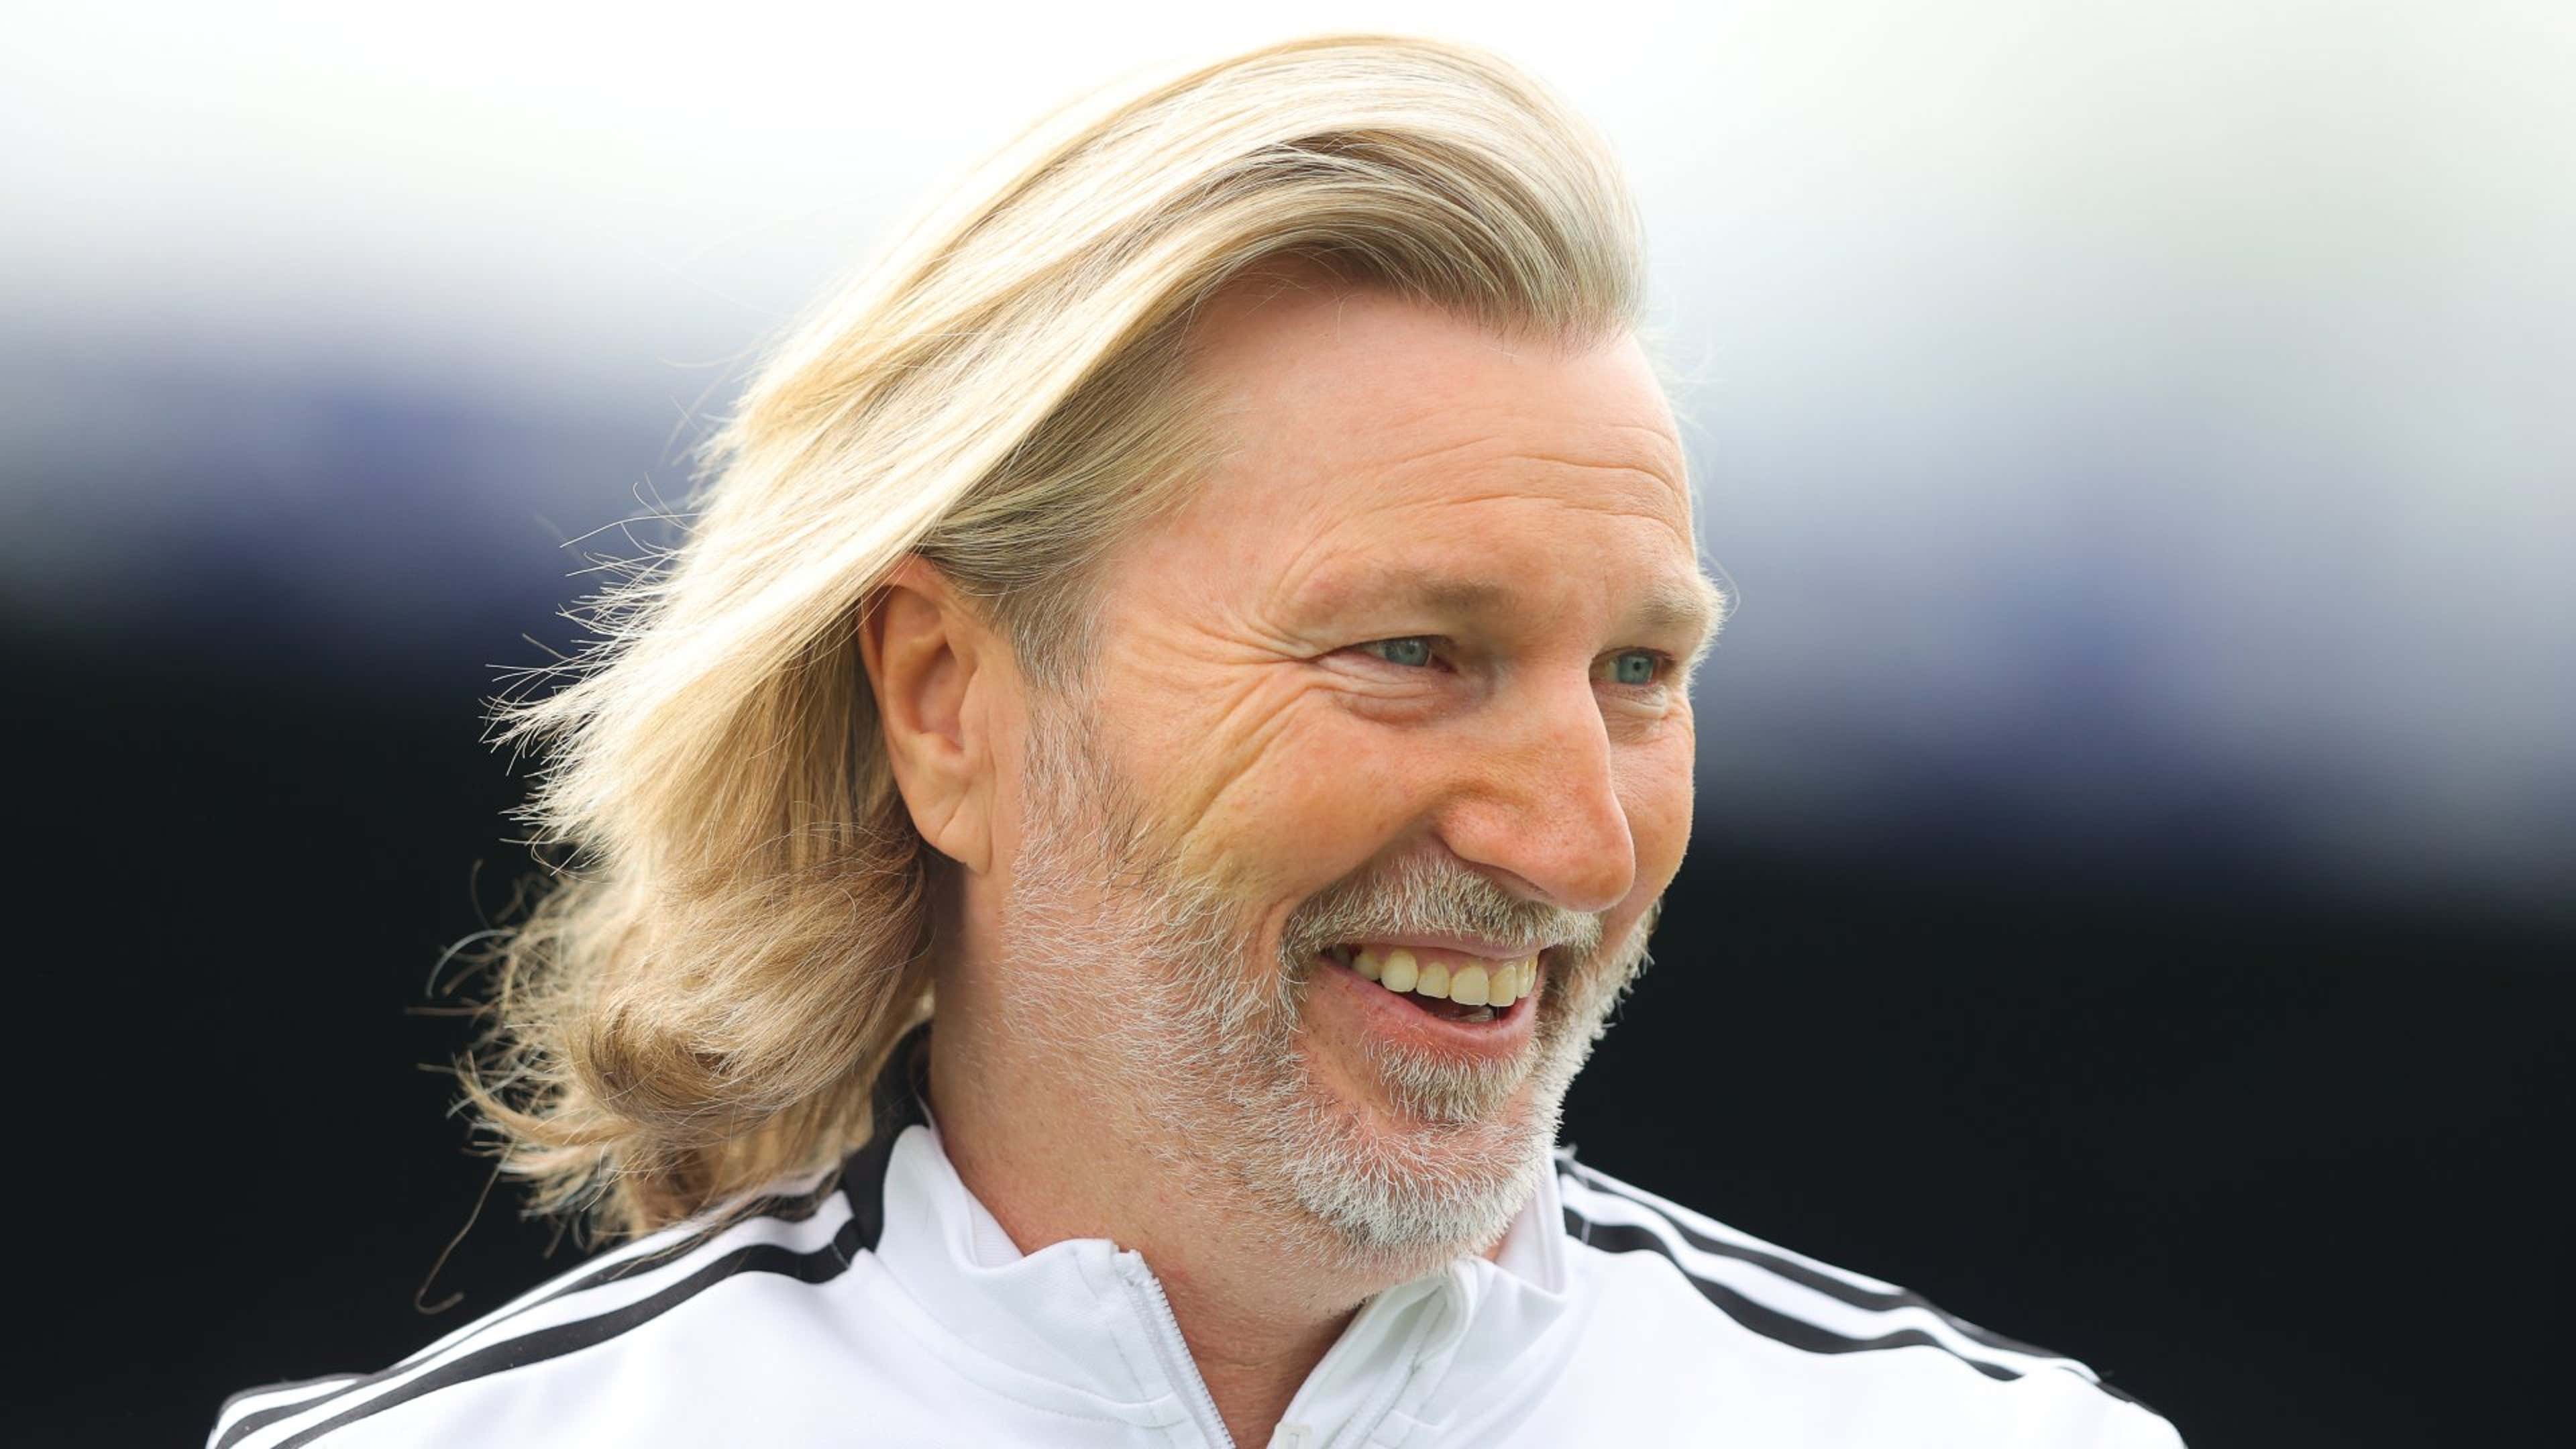 My boy scored!' - Adorable live TV moment as Robbie Savage realises his son  has hit first senior goal with Forest Green amid loan from Man Utd |  Goal.com UK